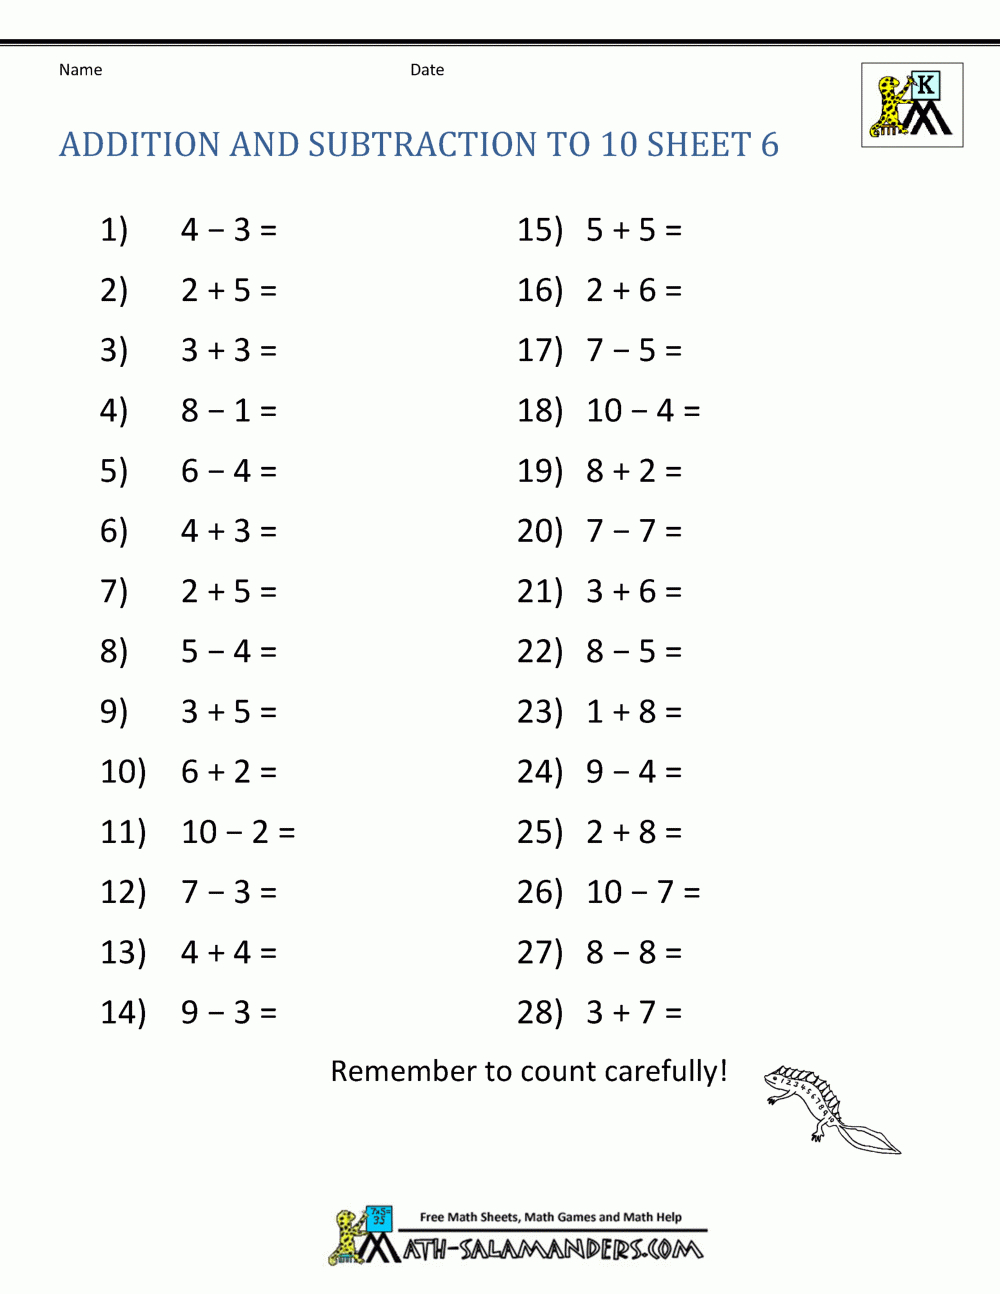 Addition And Subtraction Worksheets For Kindergarten - Free Printable Addition And Subtraction Worksheets